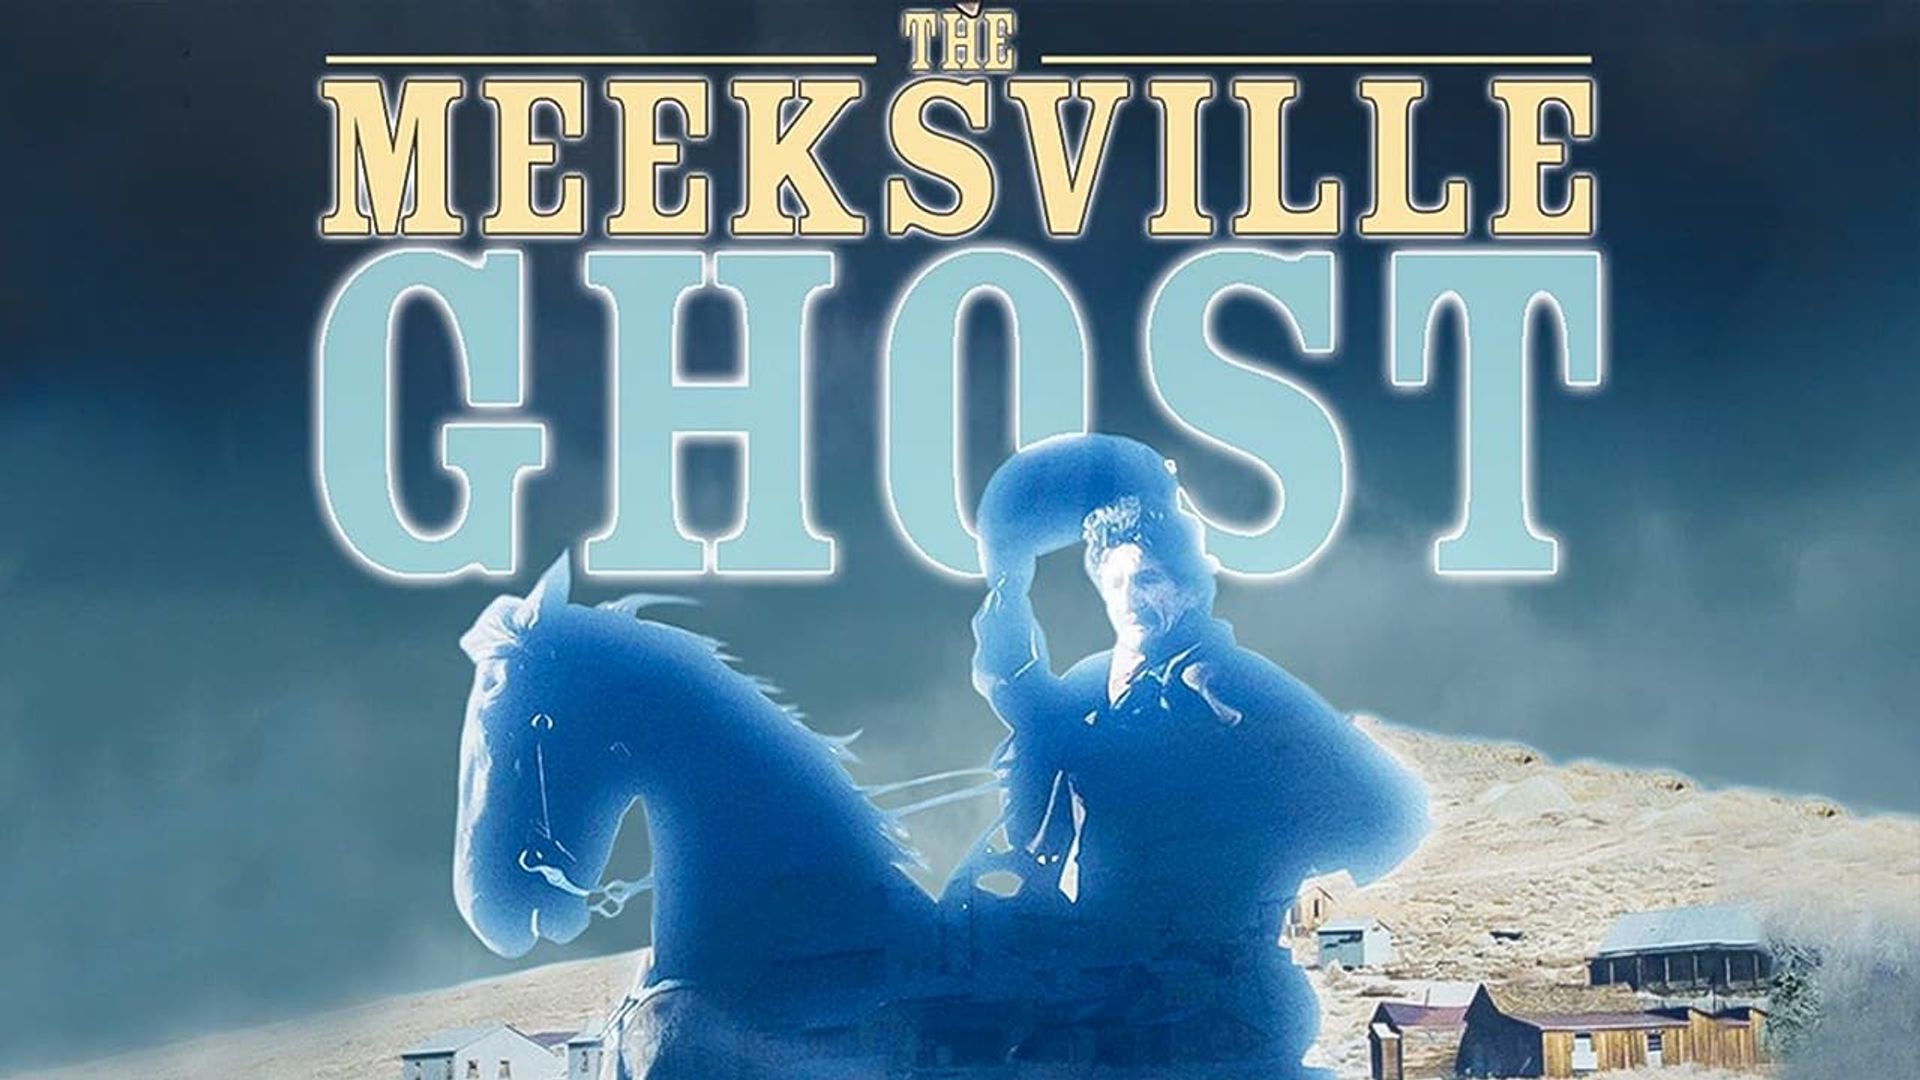 The Meeksville Ghost background